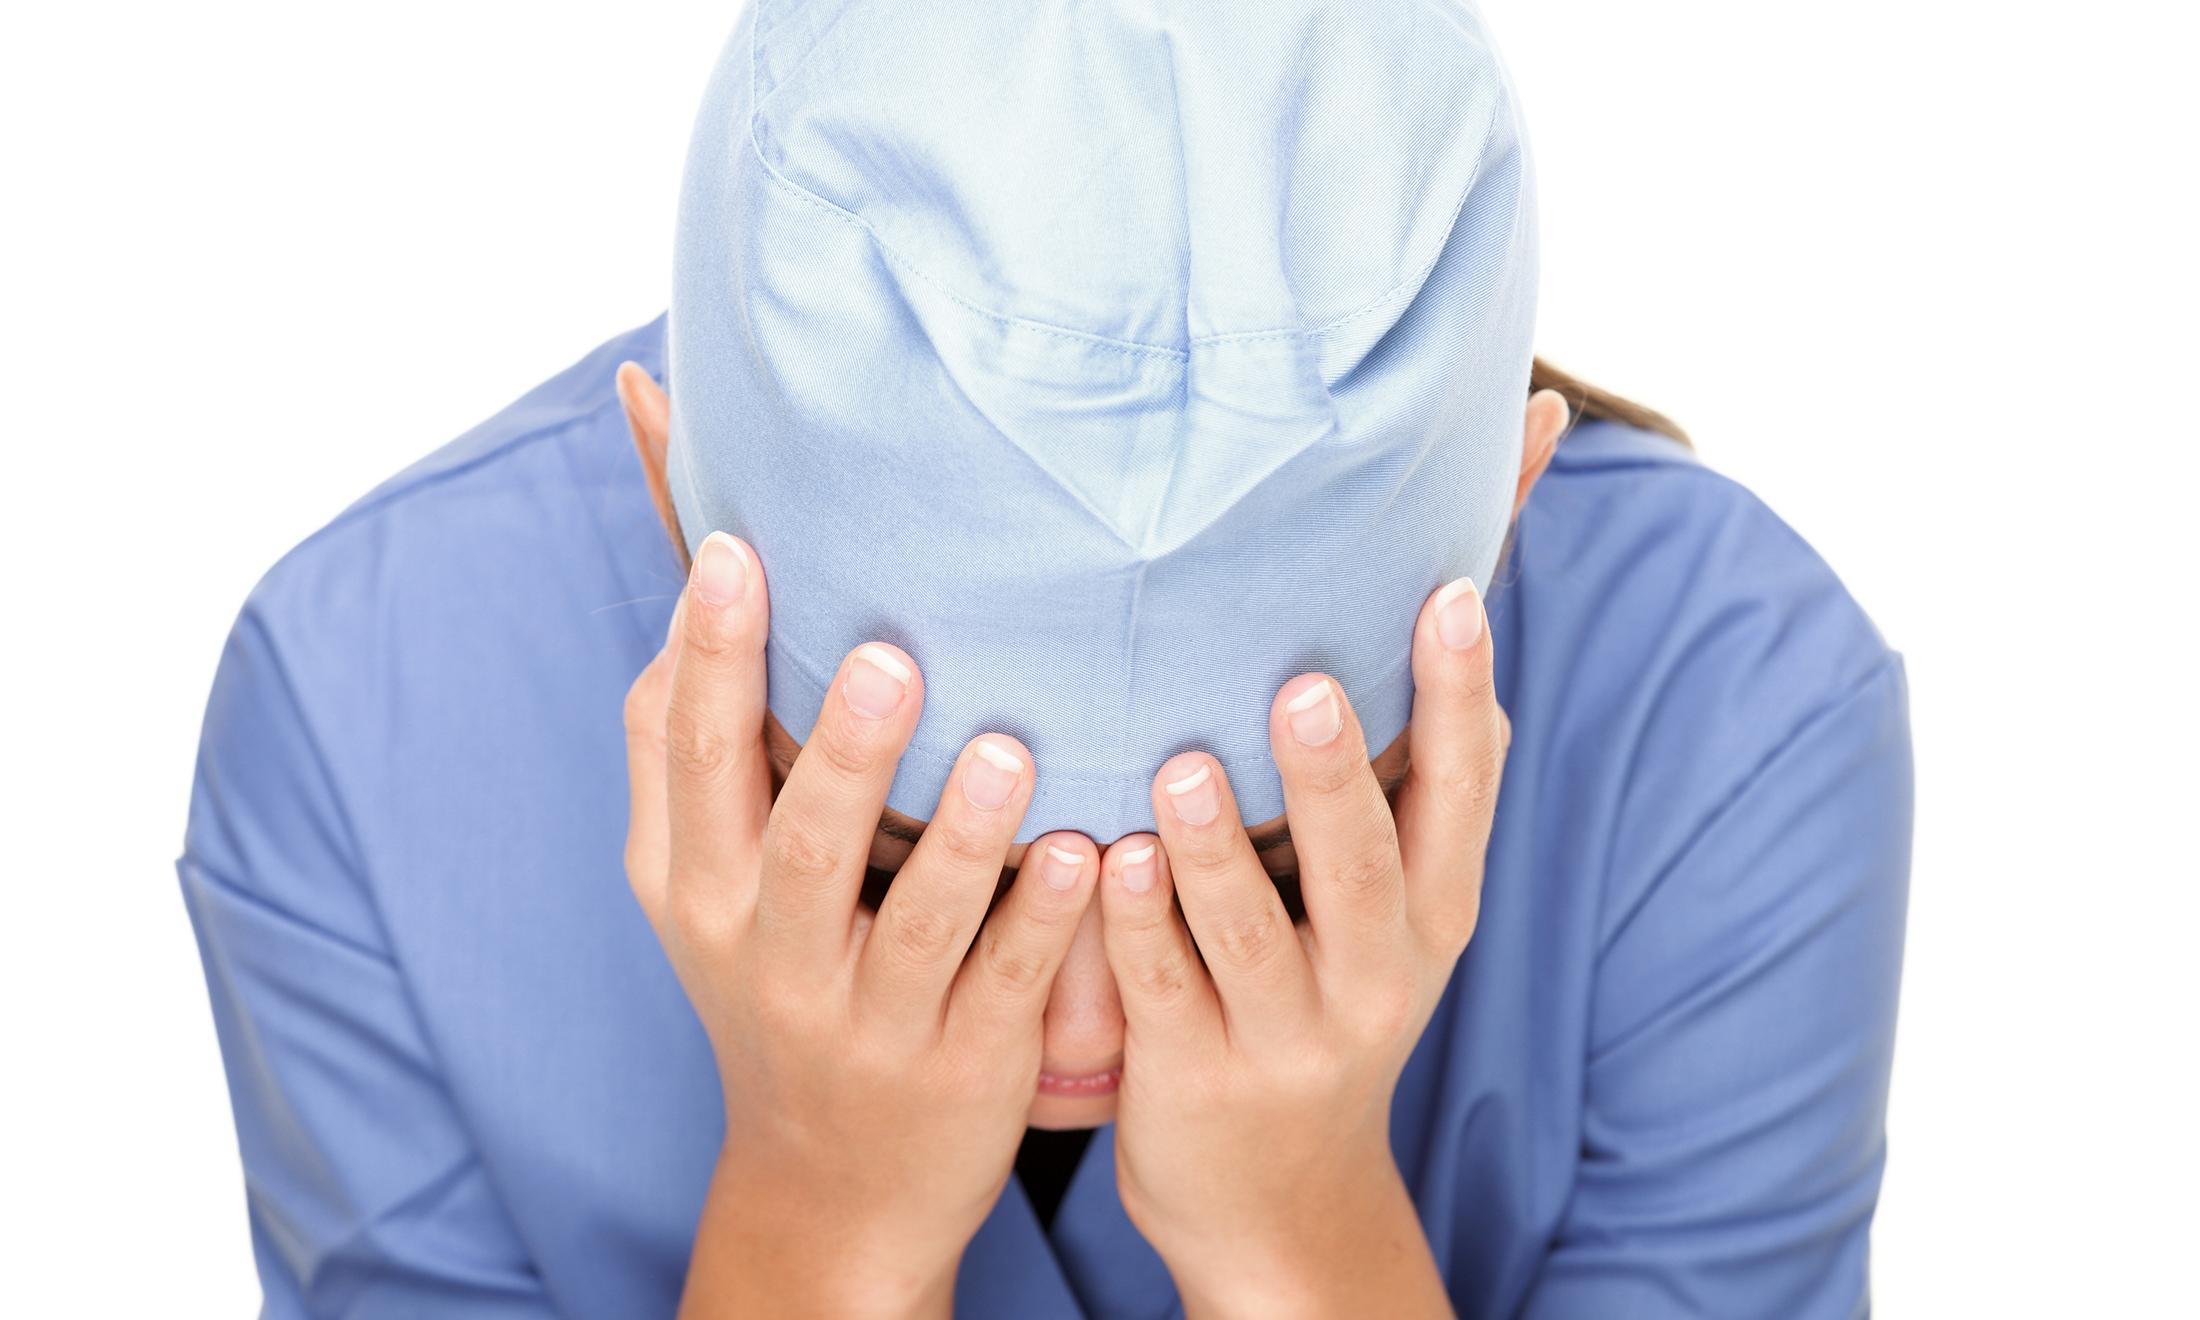 An image of a person in scrubs who appears to be upset.